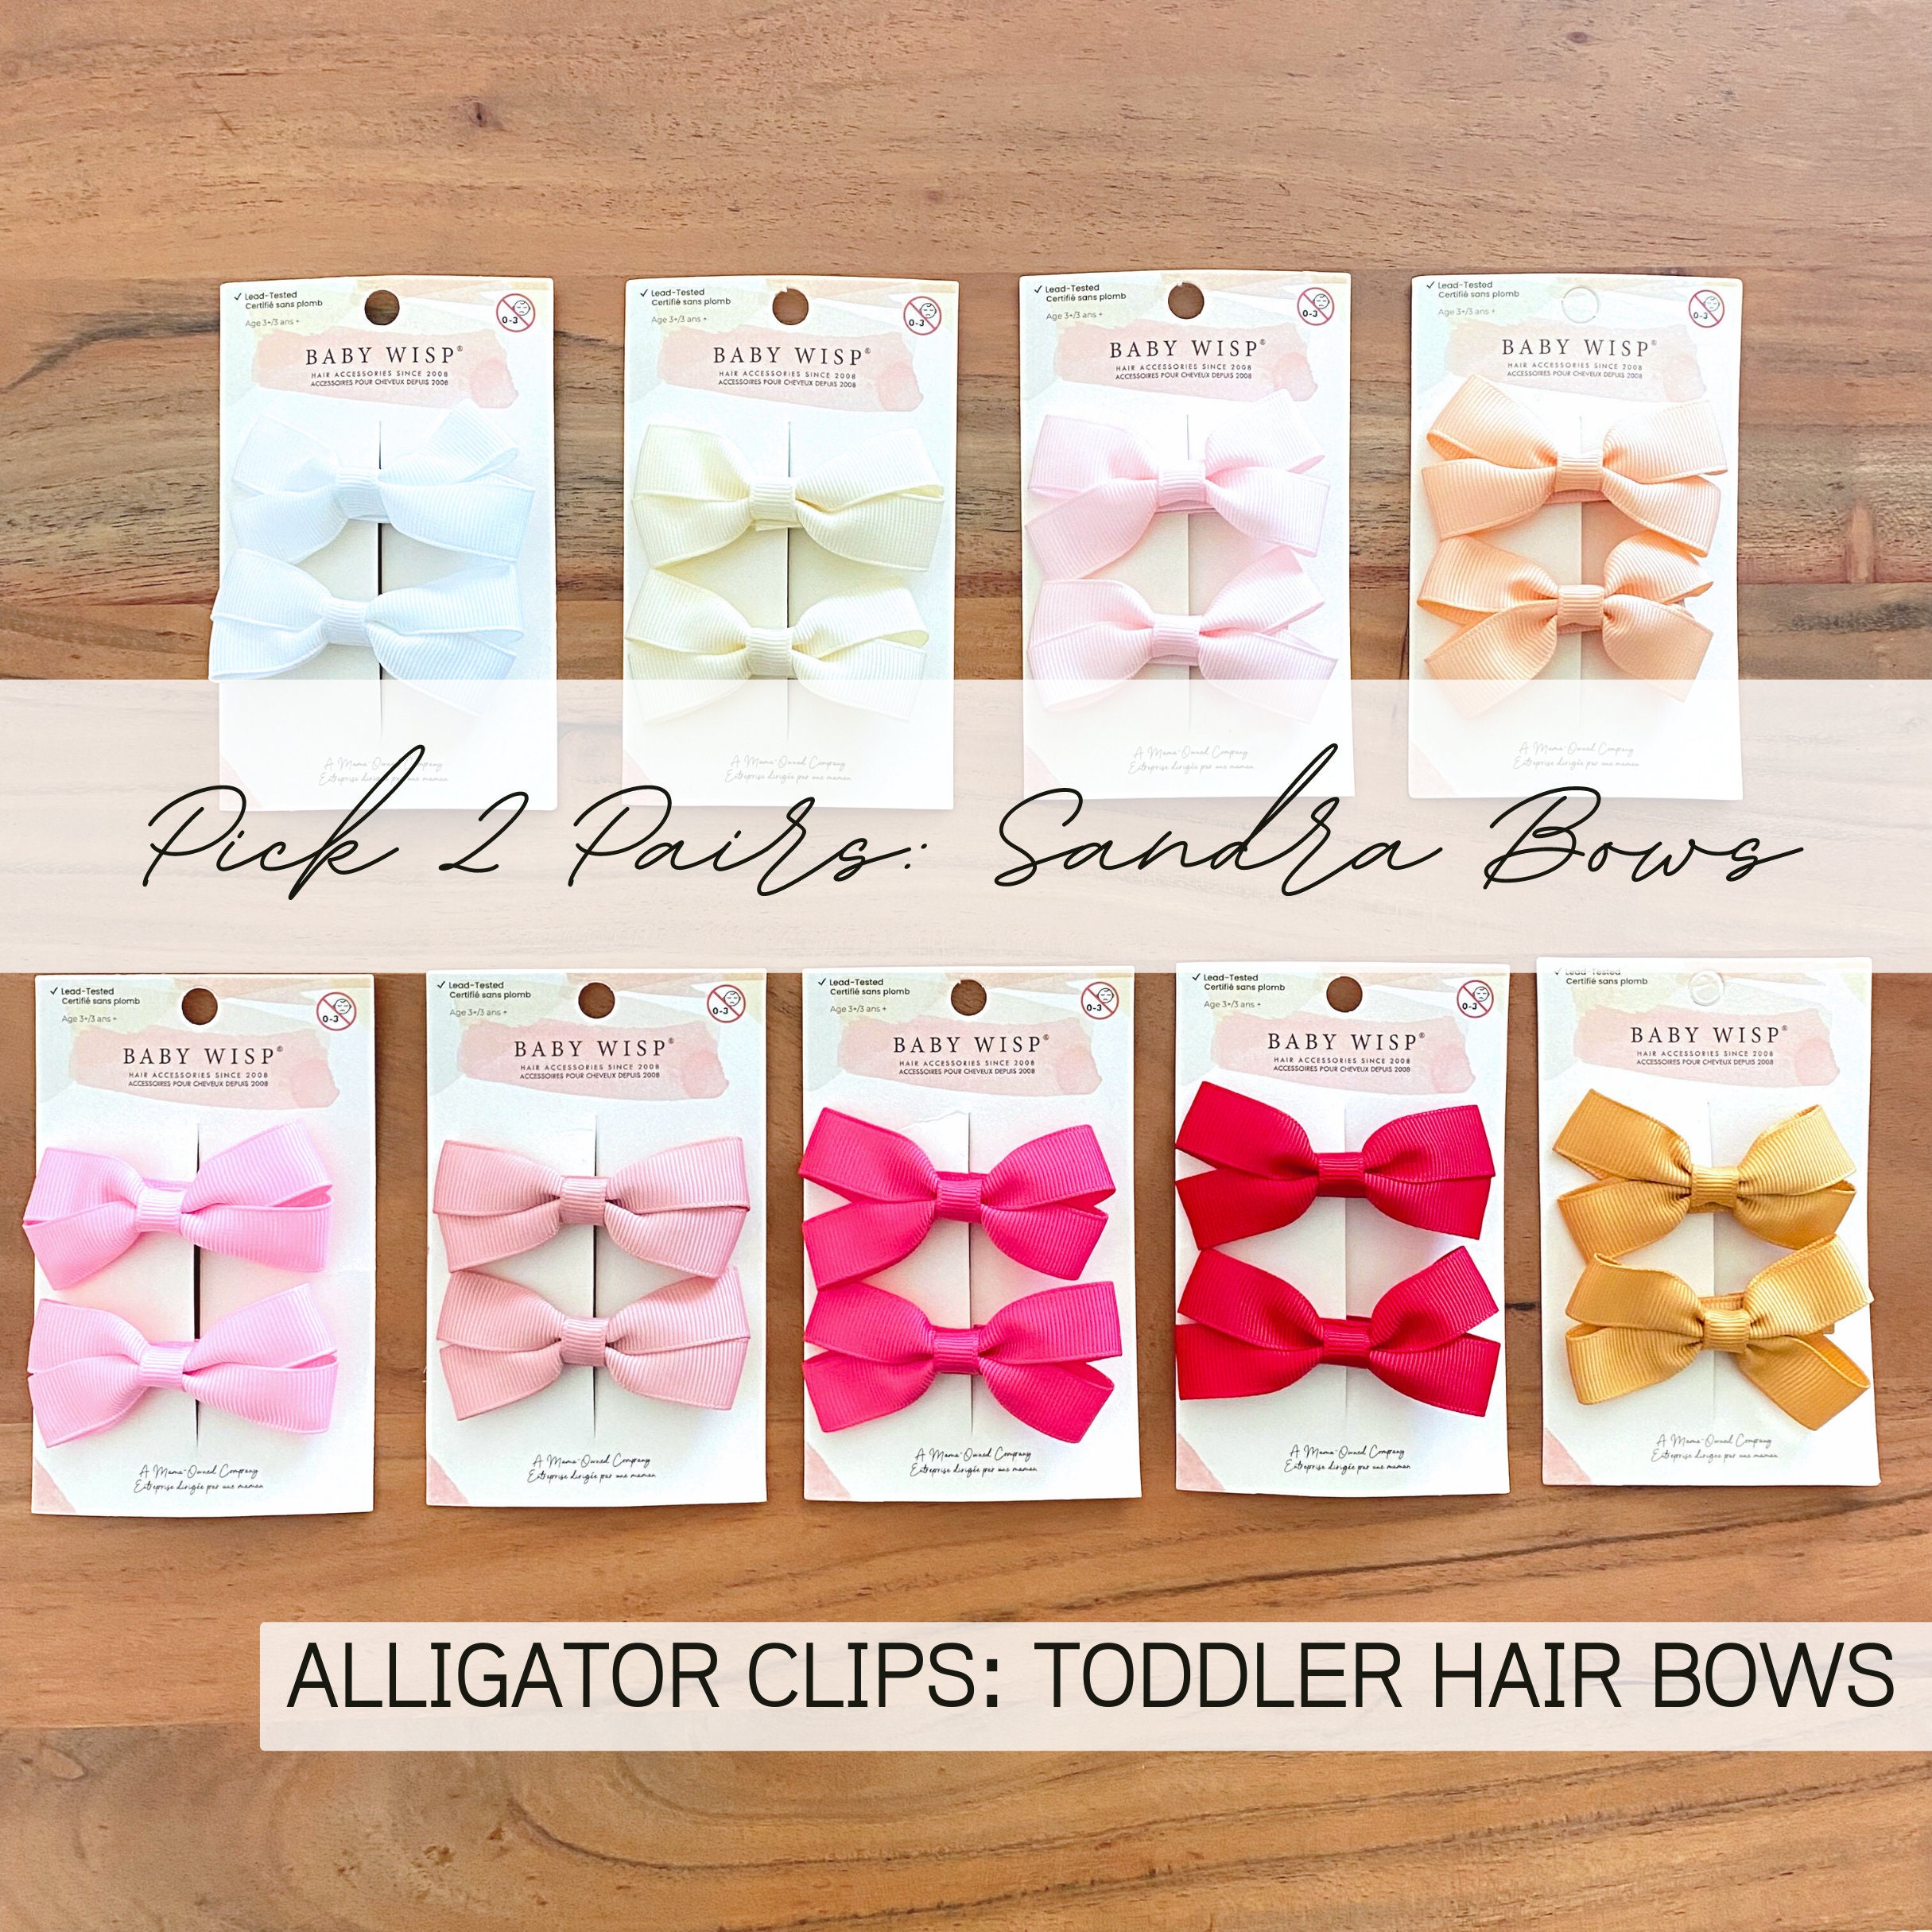 Baby Wisp® 10 Tiny Baby Toddler Bows, Girl Bow Clips, Baby Hair